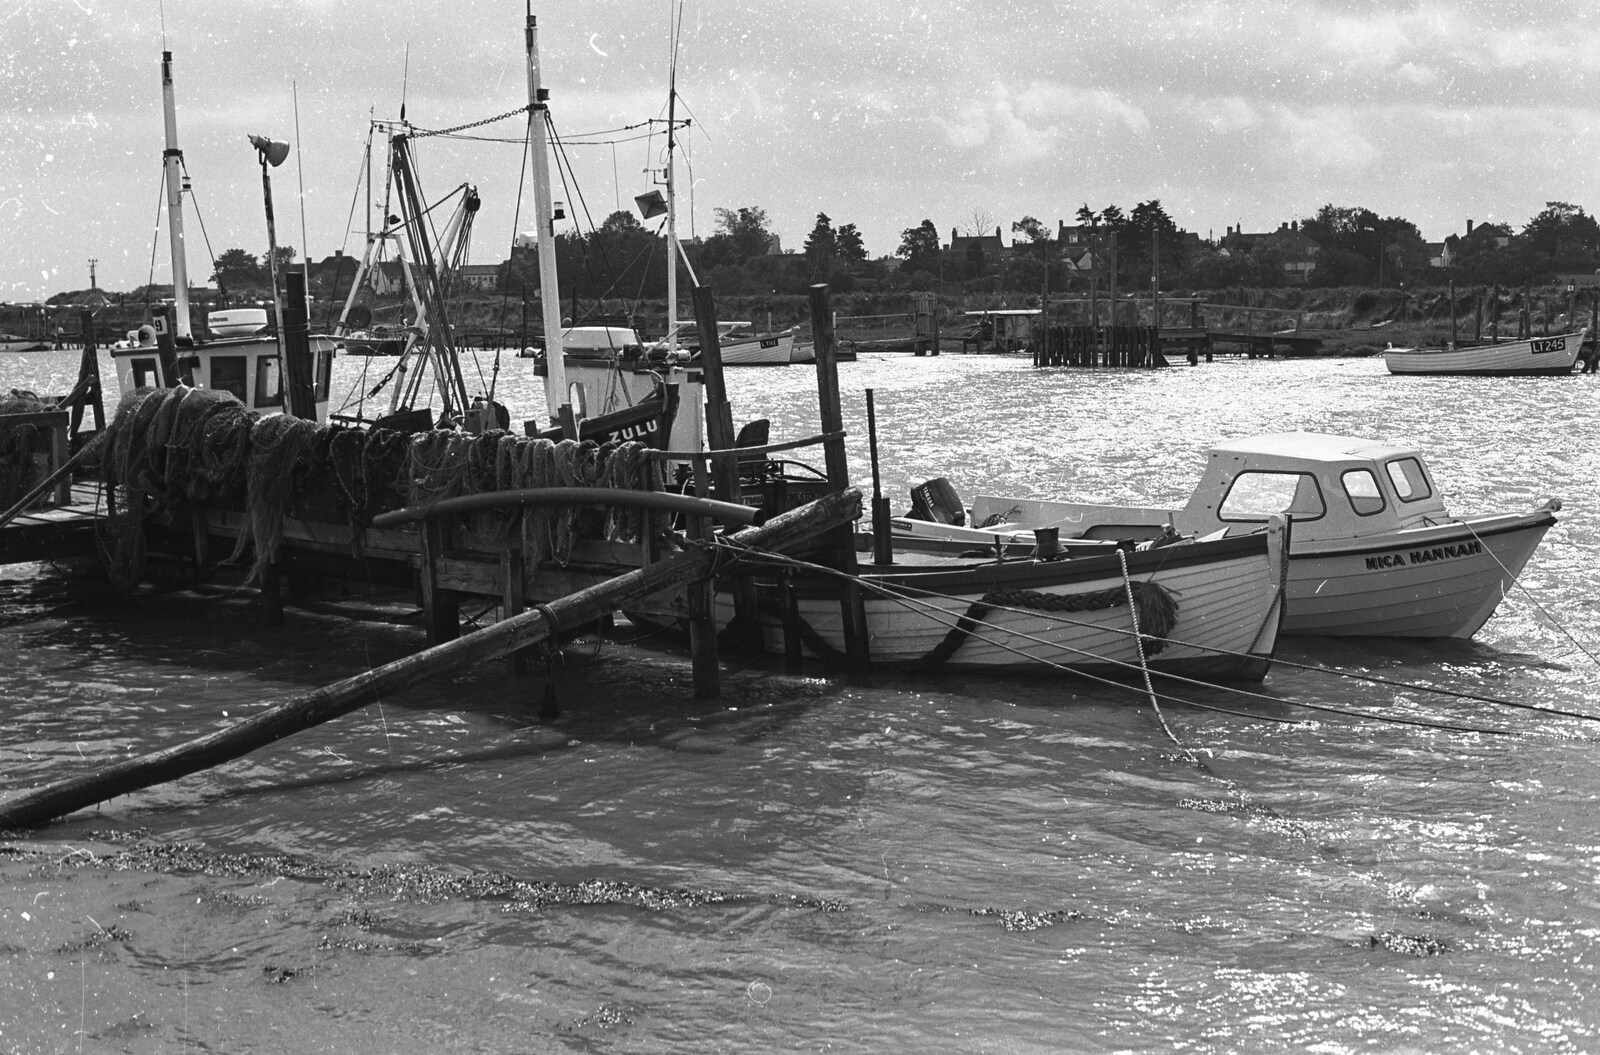 Blackshore Quay in Black and White, Southwold and Sizewell, Suffolk - 16th September 1992: A tangle of nets, ropes and boats